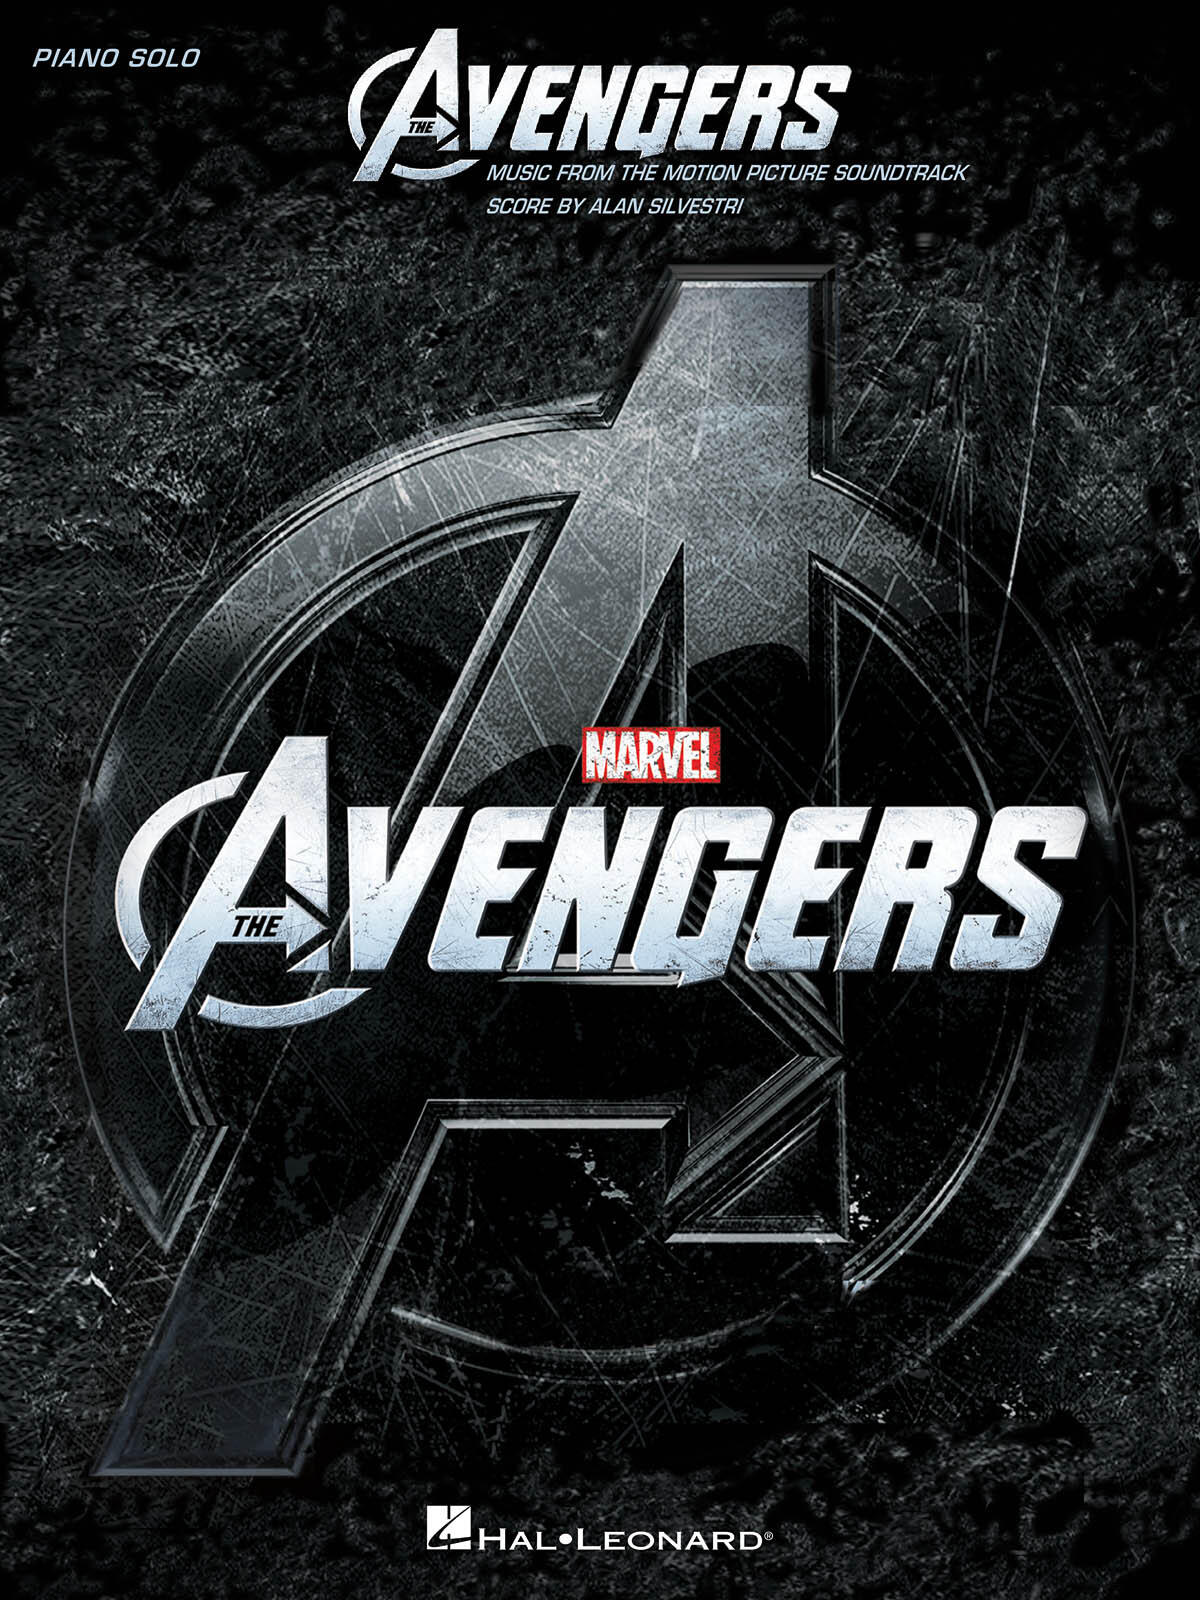 The Avengers Music From the Motion Picture Soundtrack : photo 1